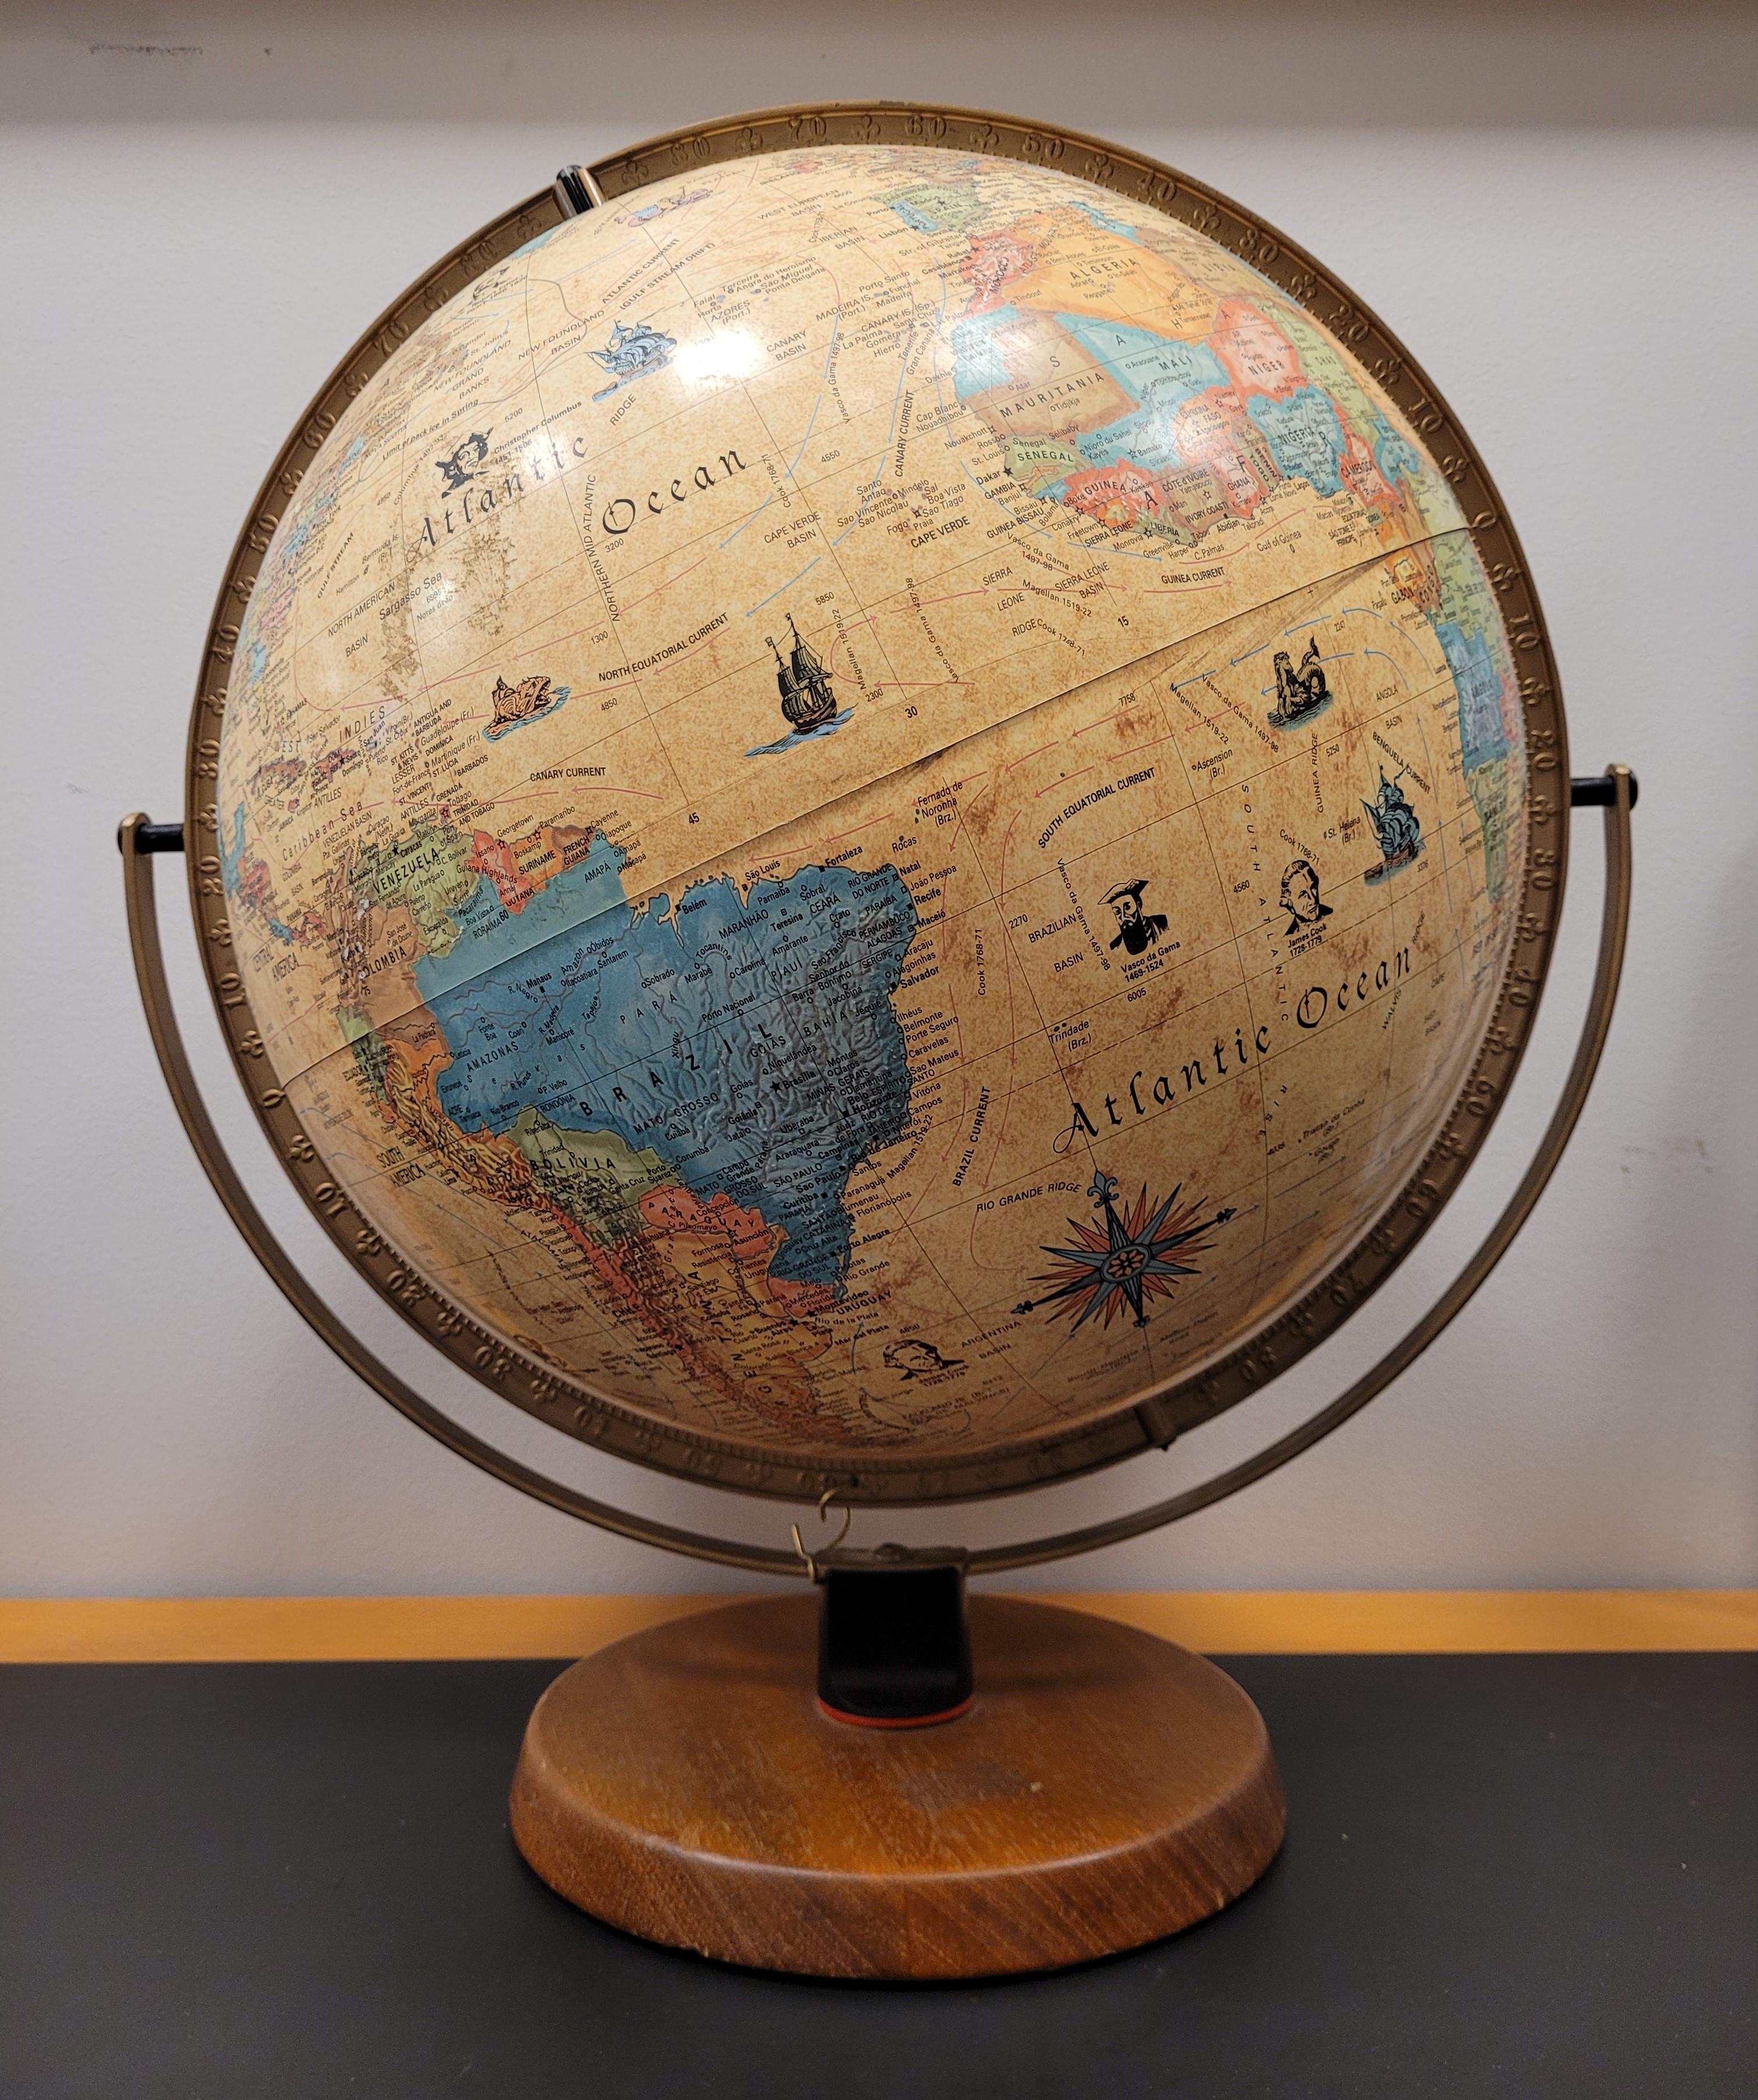 Beautiful Vintage Danish World Rotating Globe from the 50s. Vintage World Globe by Scan-Globe A/S. Vintage Desk Decorative World Globe.
The balloon is large, with a diameter of about 54cm (see measurements after description). The balloon is inserted